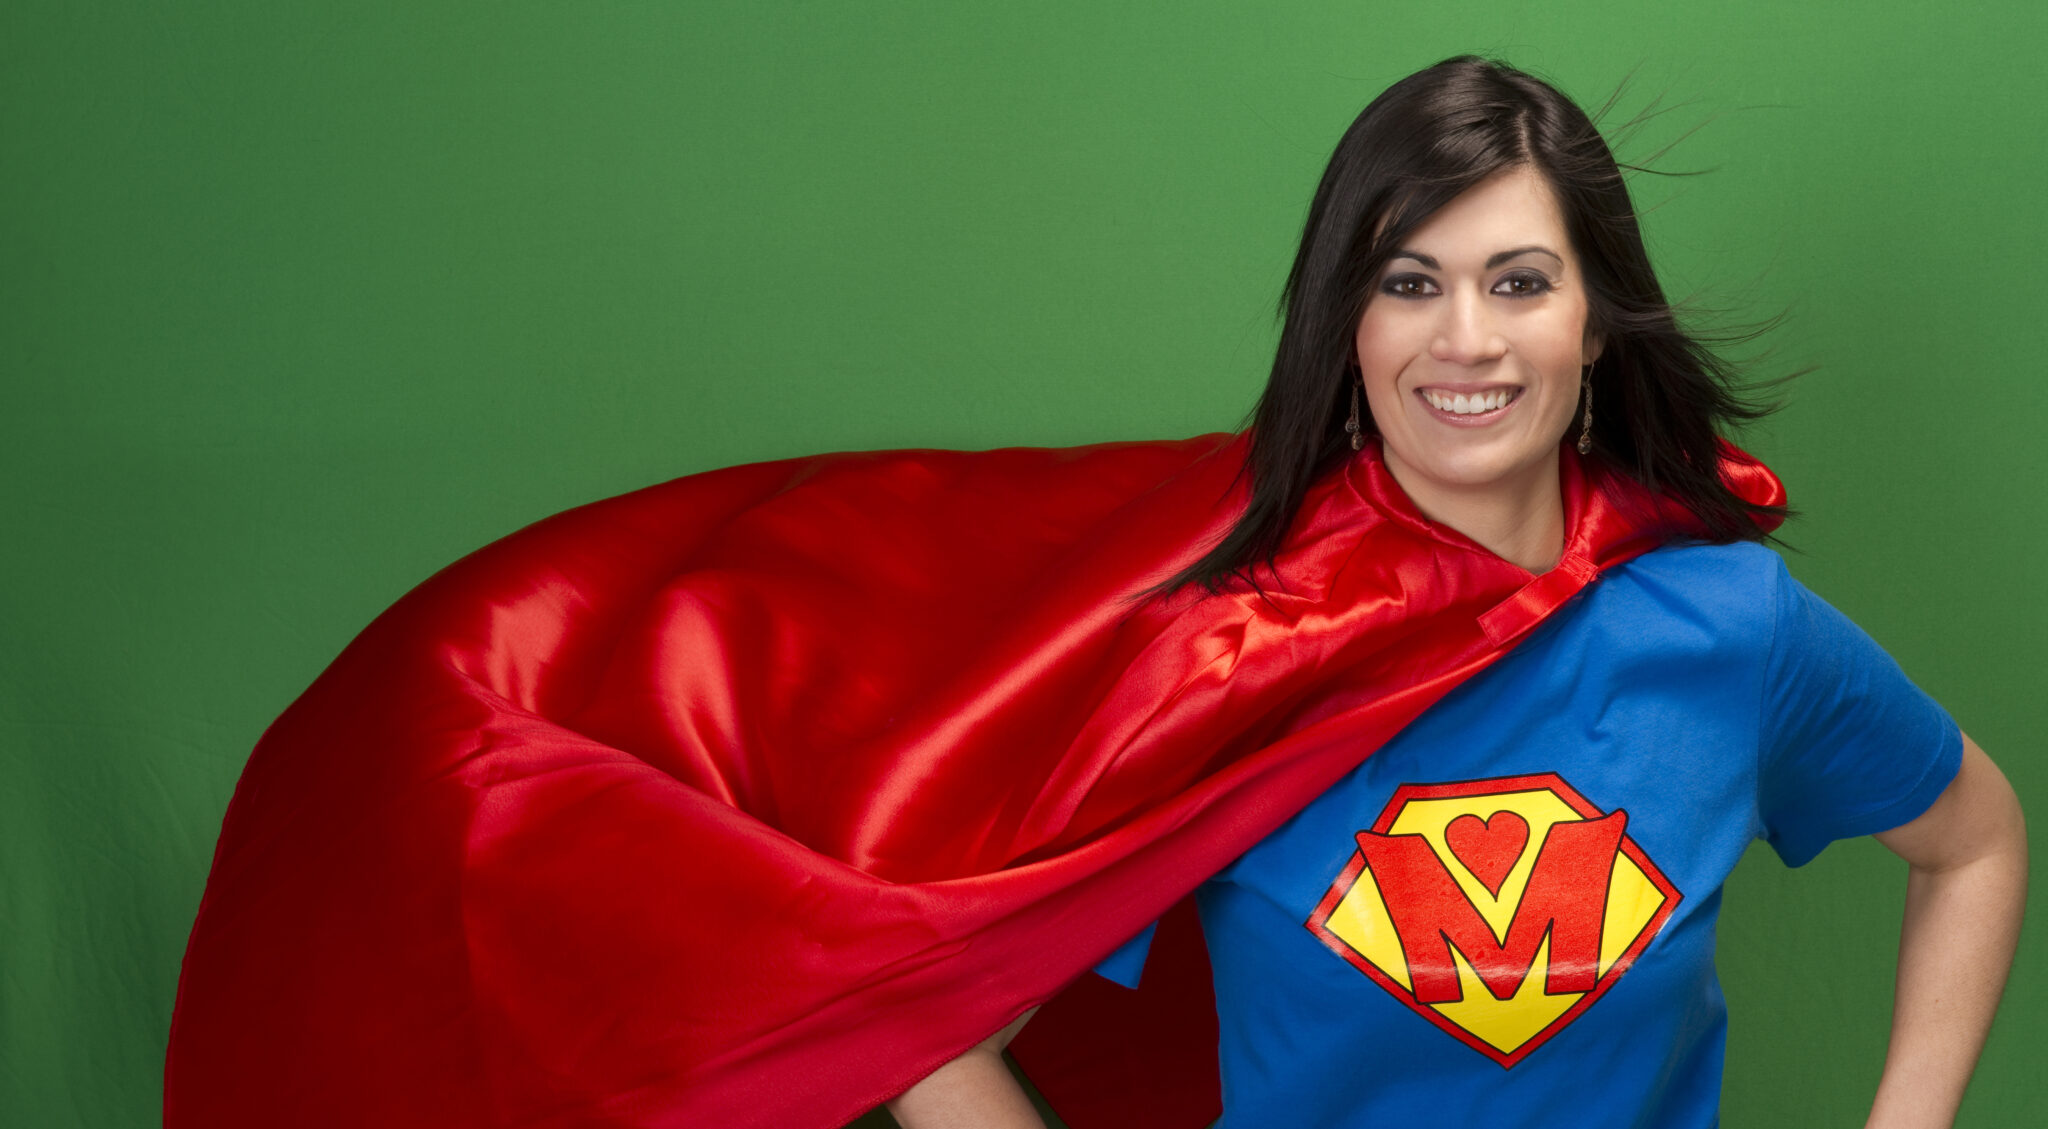 Proud Mom as Super Mother on Green Screen